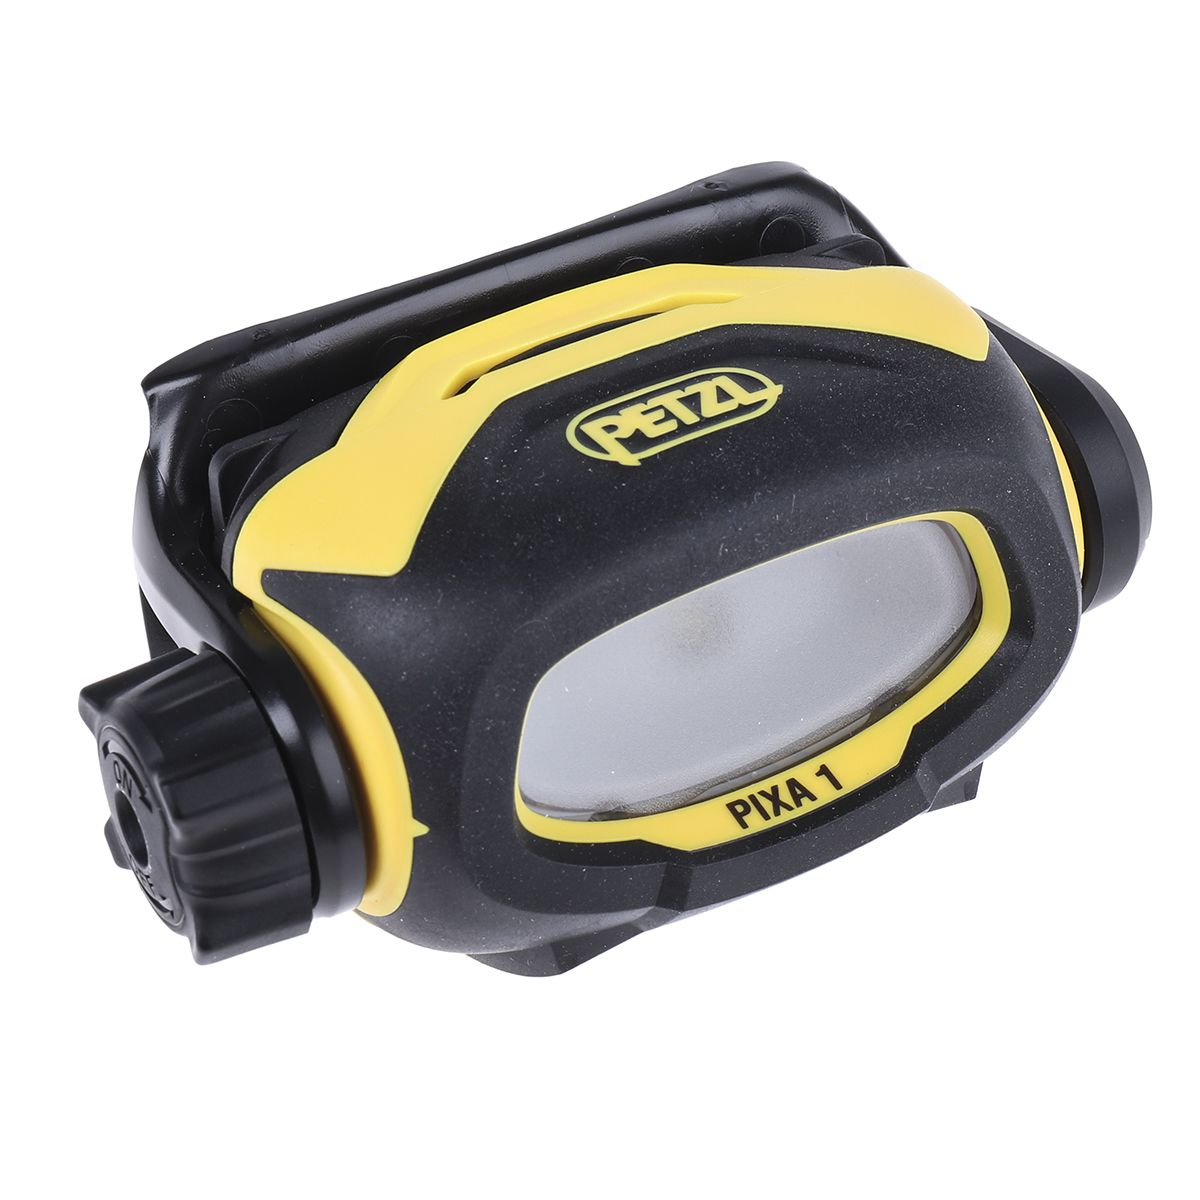 Lampe frontale LED non rechargeable Petzl, 60 lm, AA